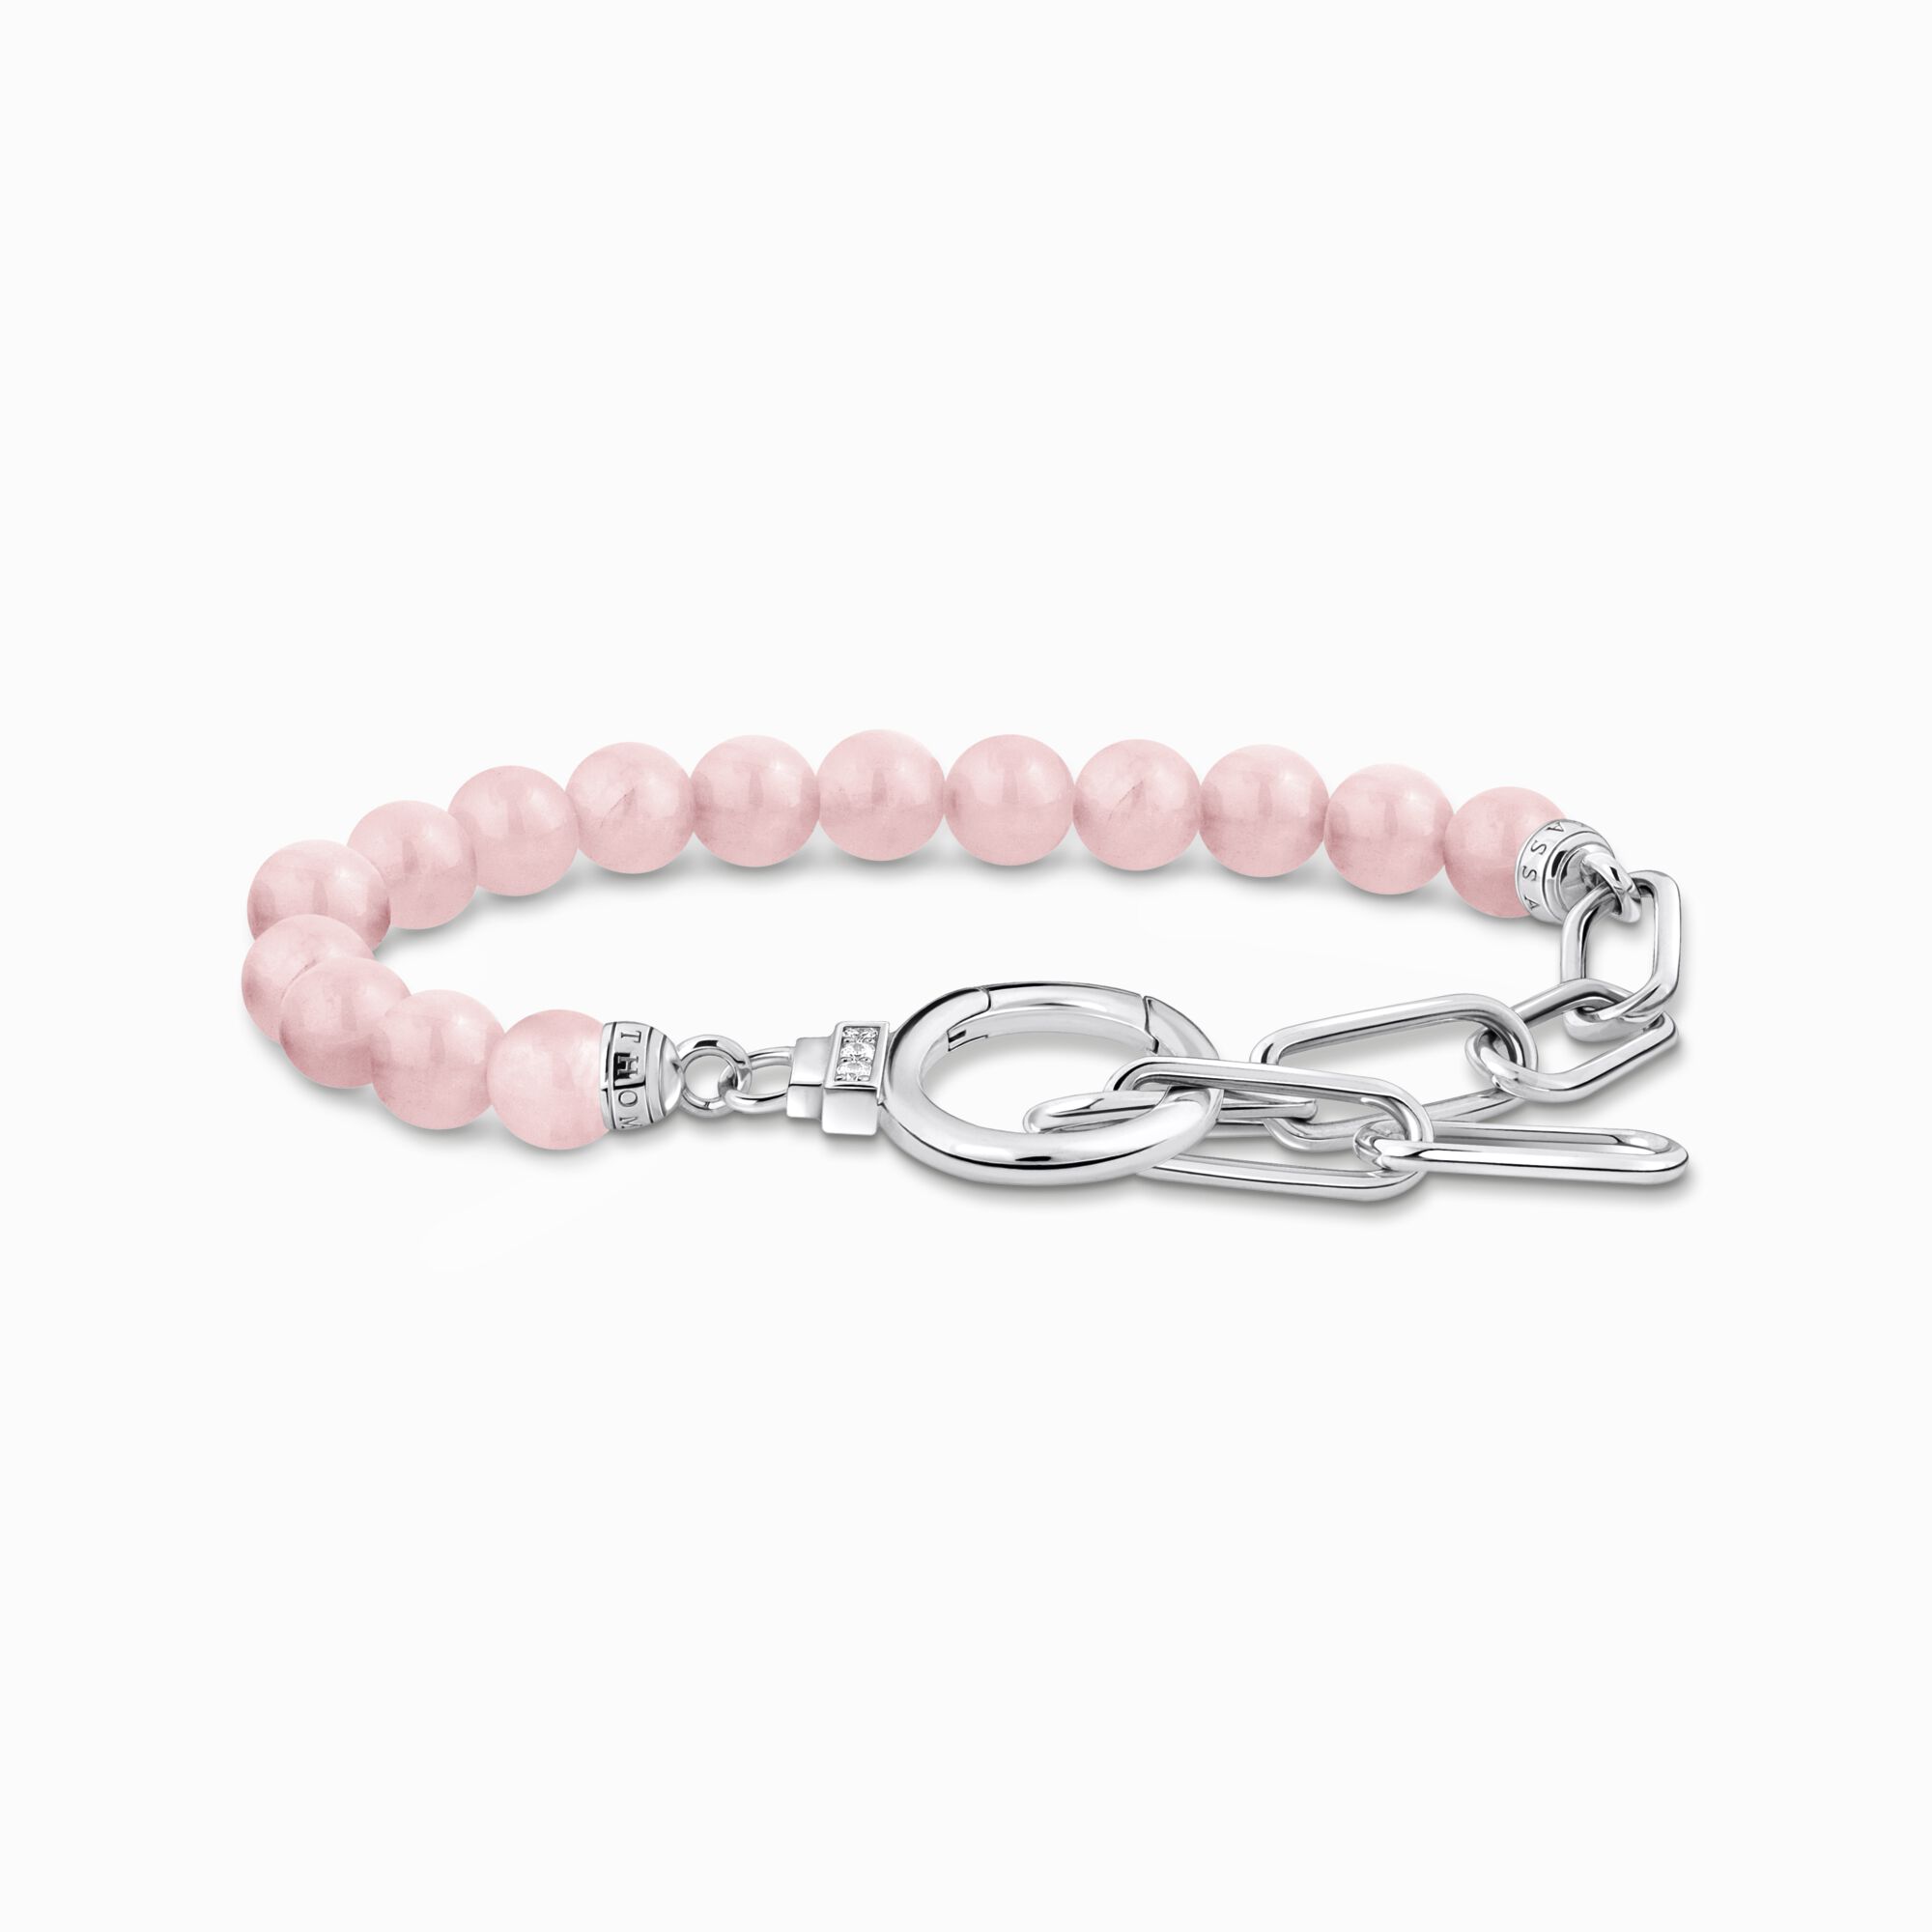 Silver bracelet with link chain elements and rose quartz beads from the  collection in the THOMAS SABO online store